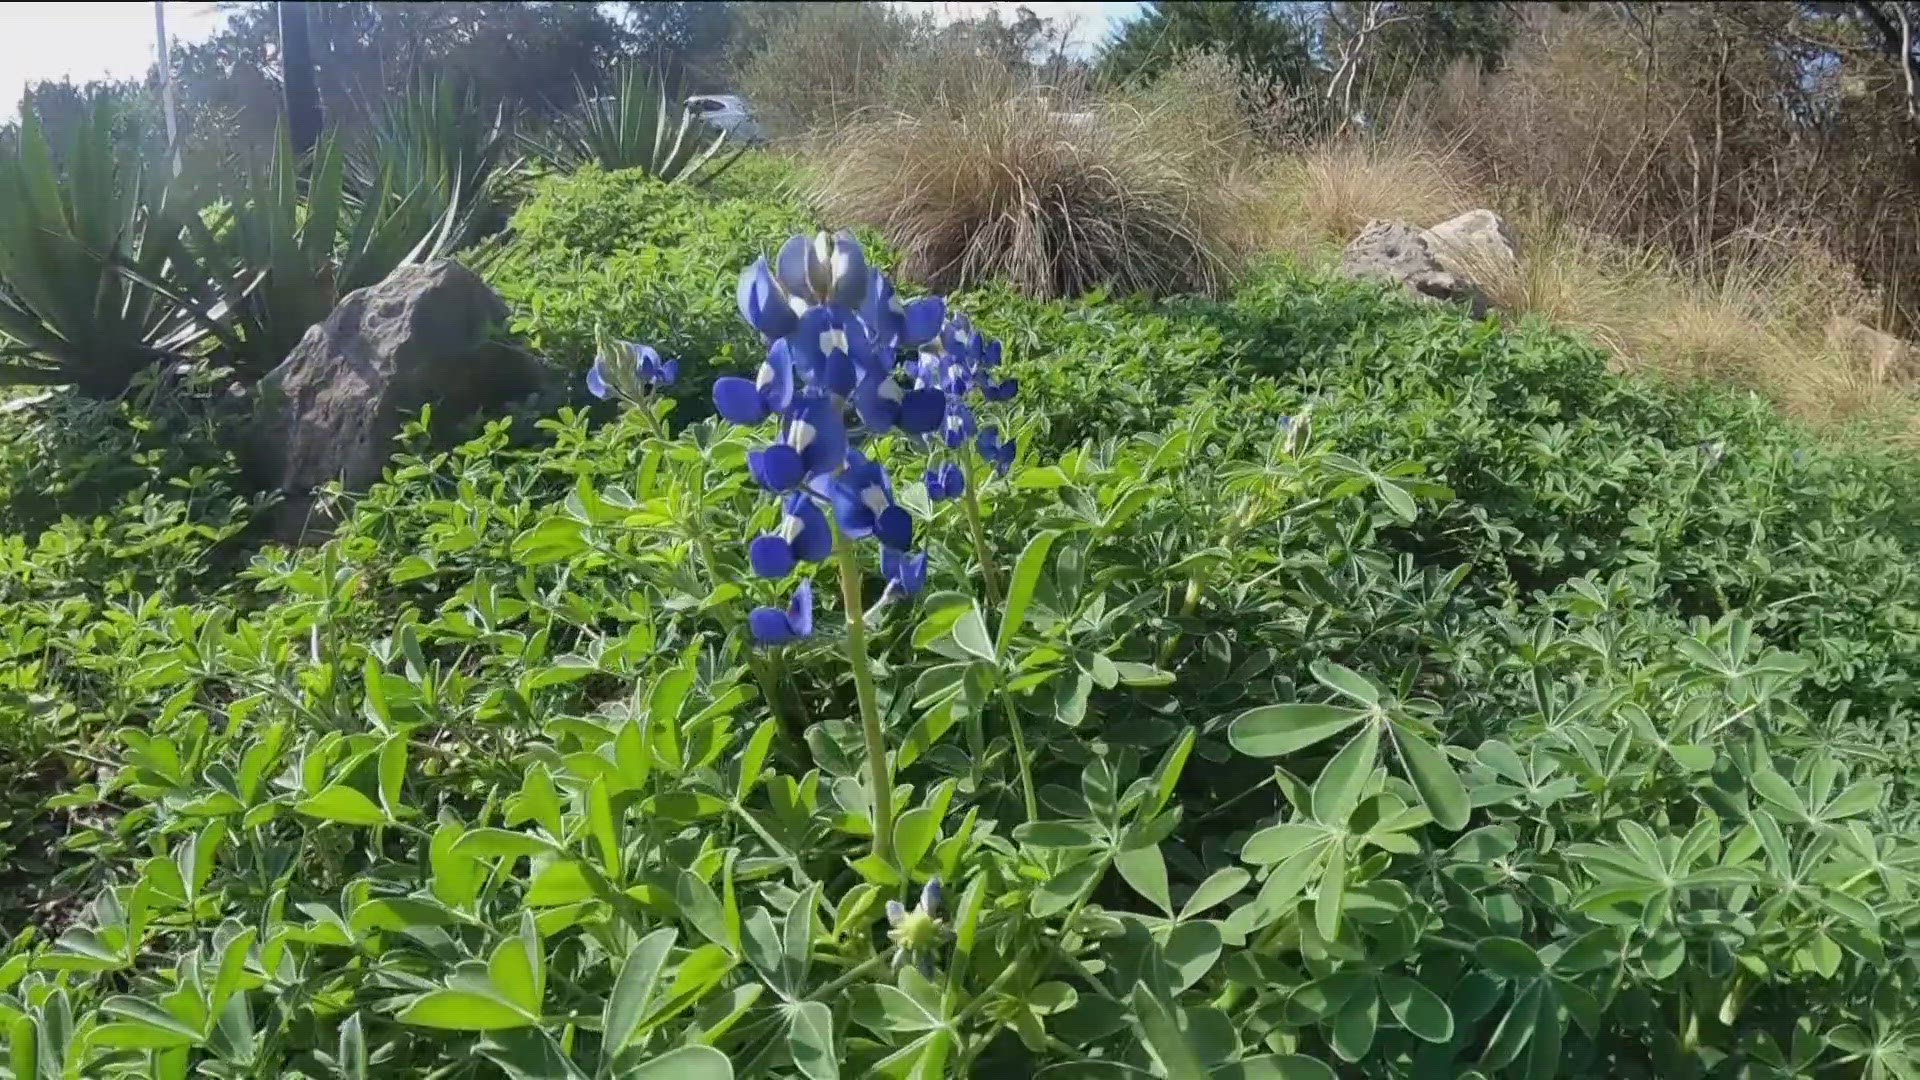 We are already starting to see some real Texas beauty – bluebonnets!